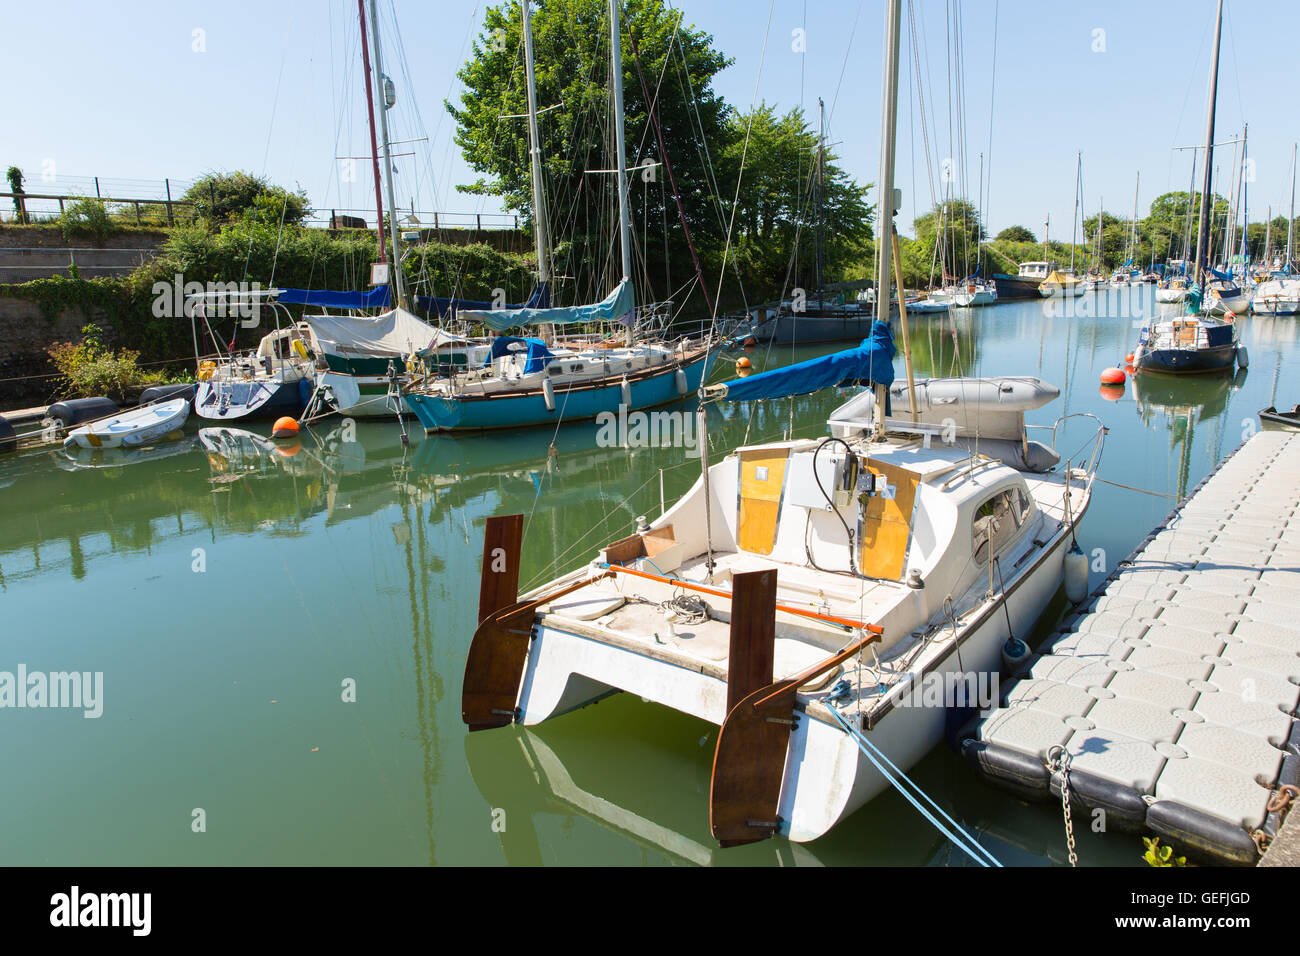 Boats in Lydney harbour Gloucestershire England uk on the River Severn Stock Photo